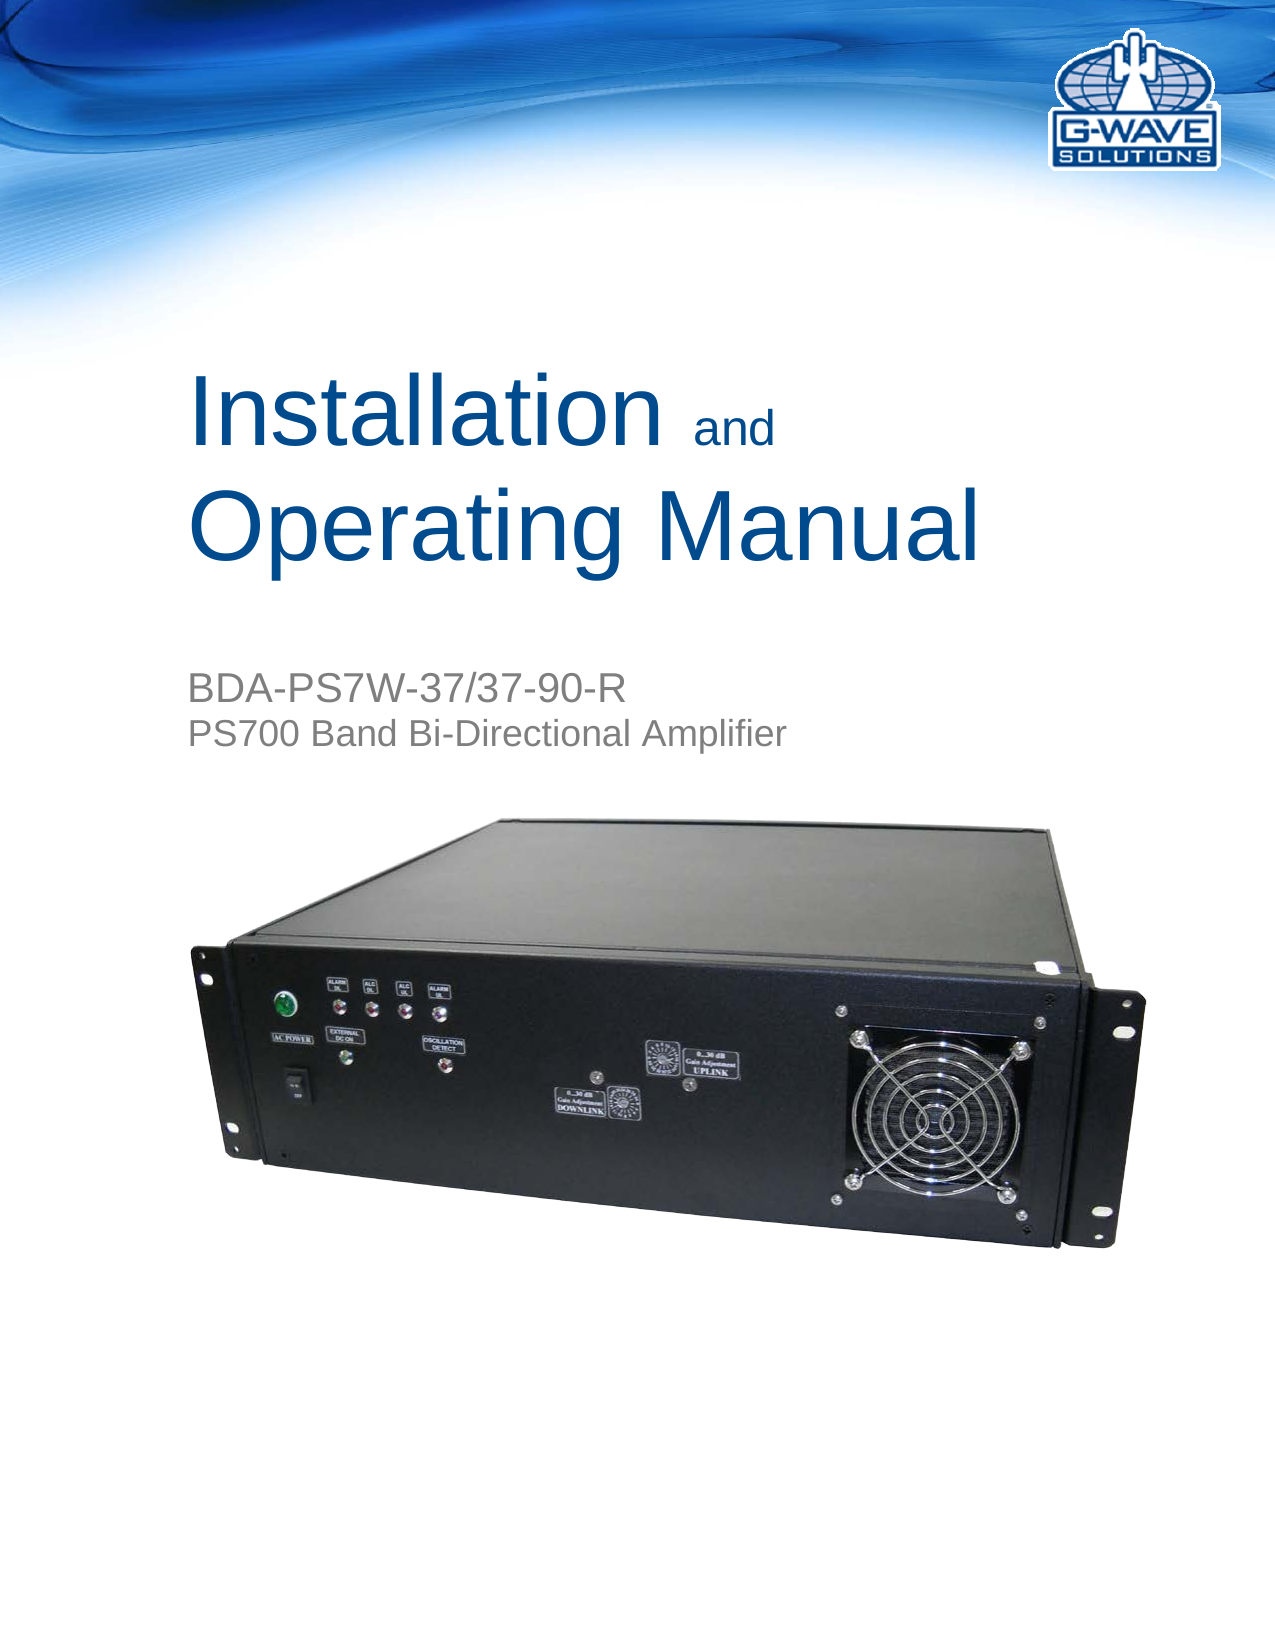       Installation and Operating Manual    BDA-PS7W-37/37-90-R PS700 Band Bi-Directional Amplifier     